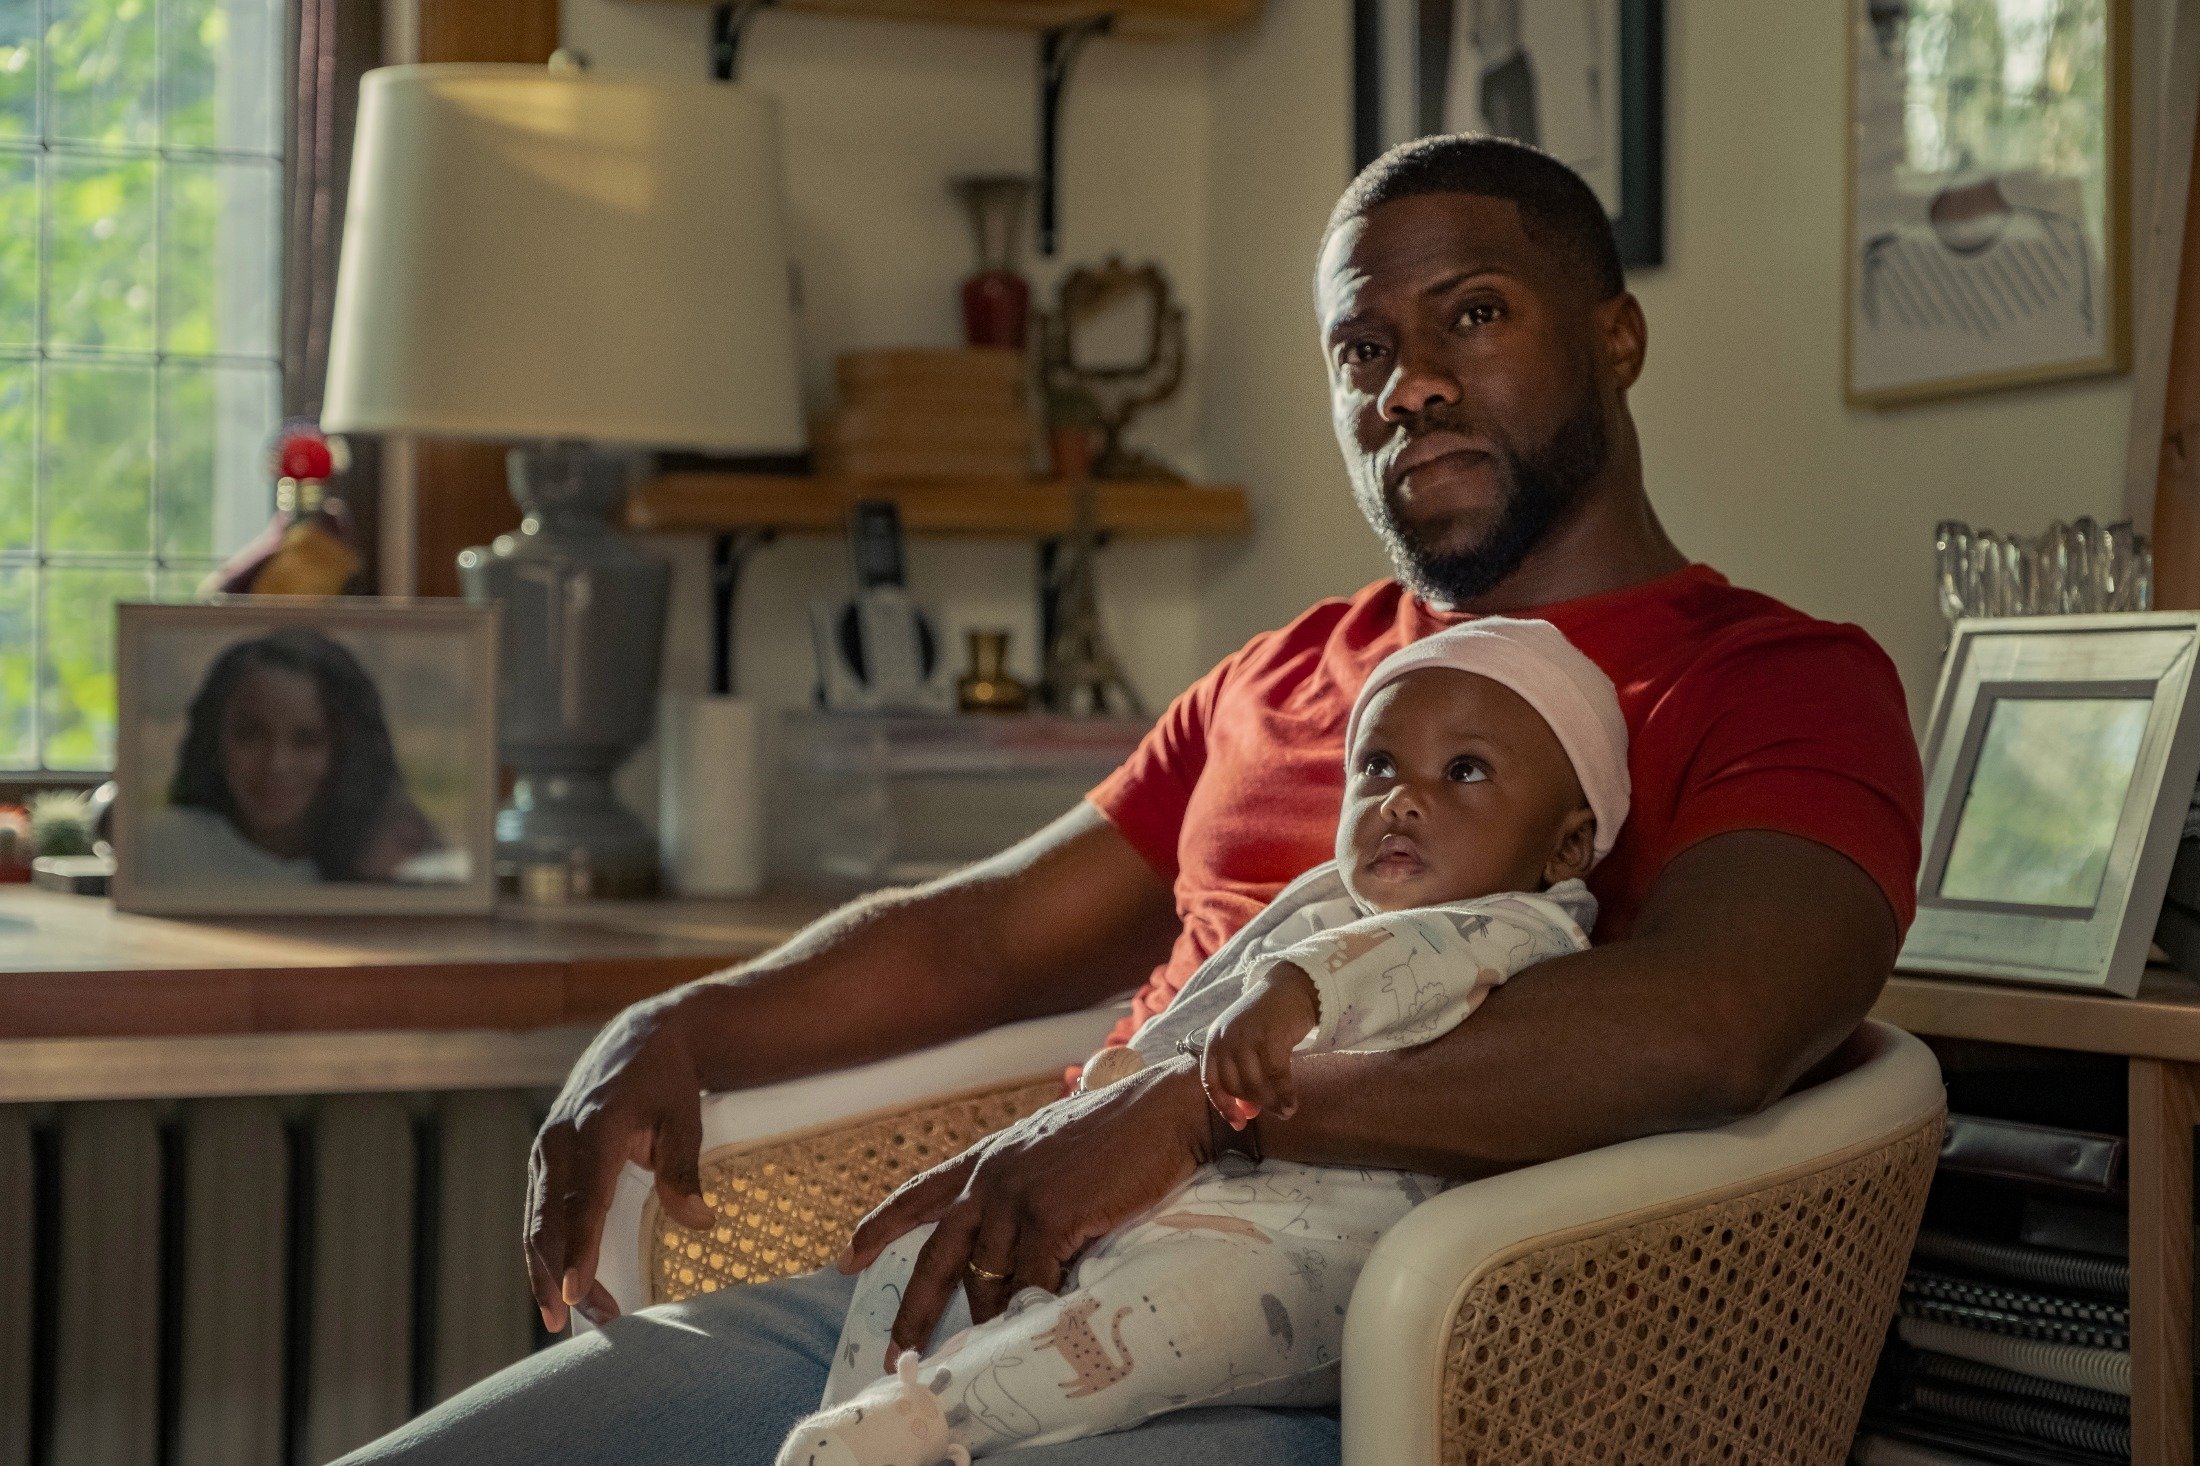 Kevin Hart hold a baby on his lap in a scene from the movie "Fatherhood." (Netflix via AP)